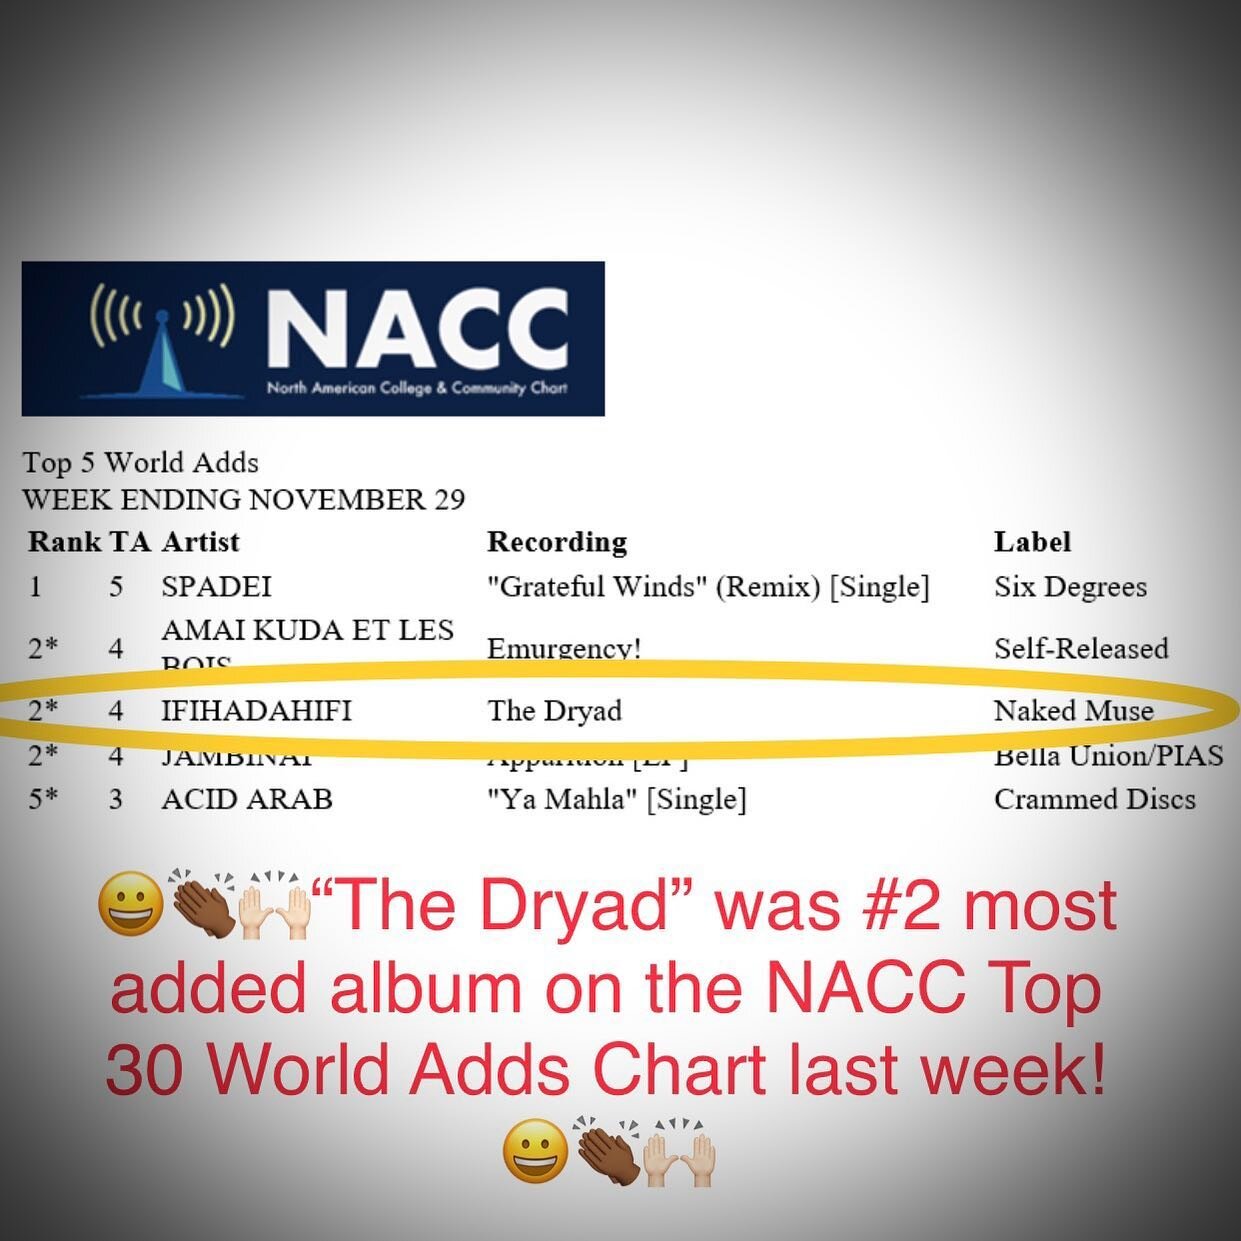 &ldquo;The Dryad&rdquo; was #2 most added album on the NACC Top 30 World Adds Chart this last week! 😀👏🏾🙌🏻